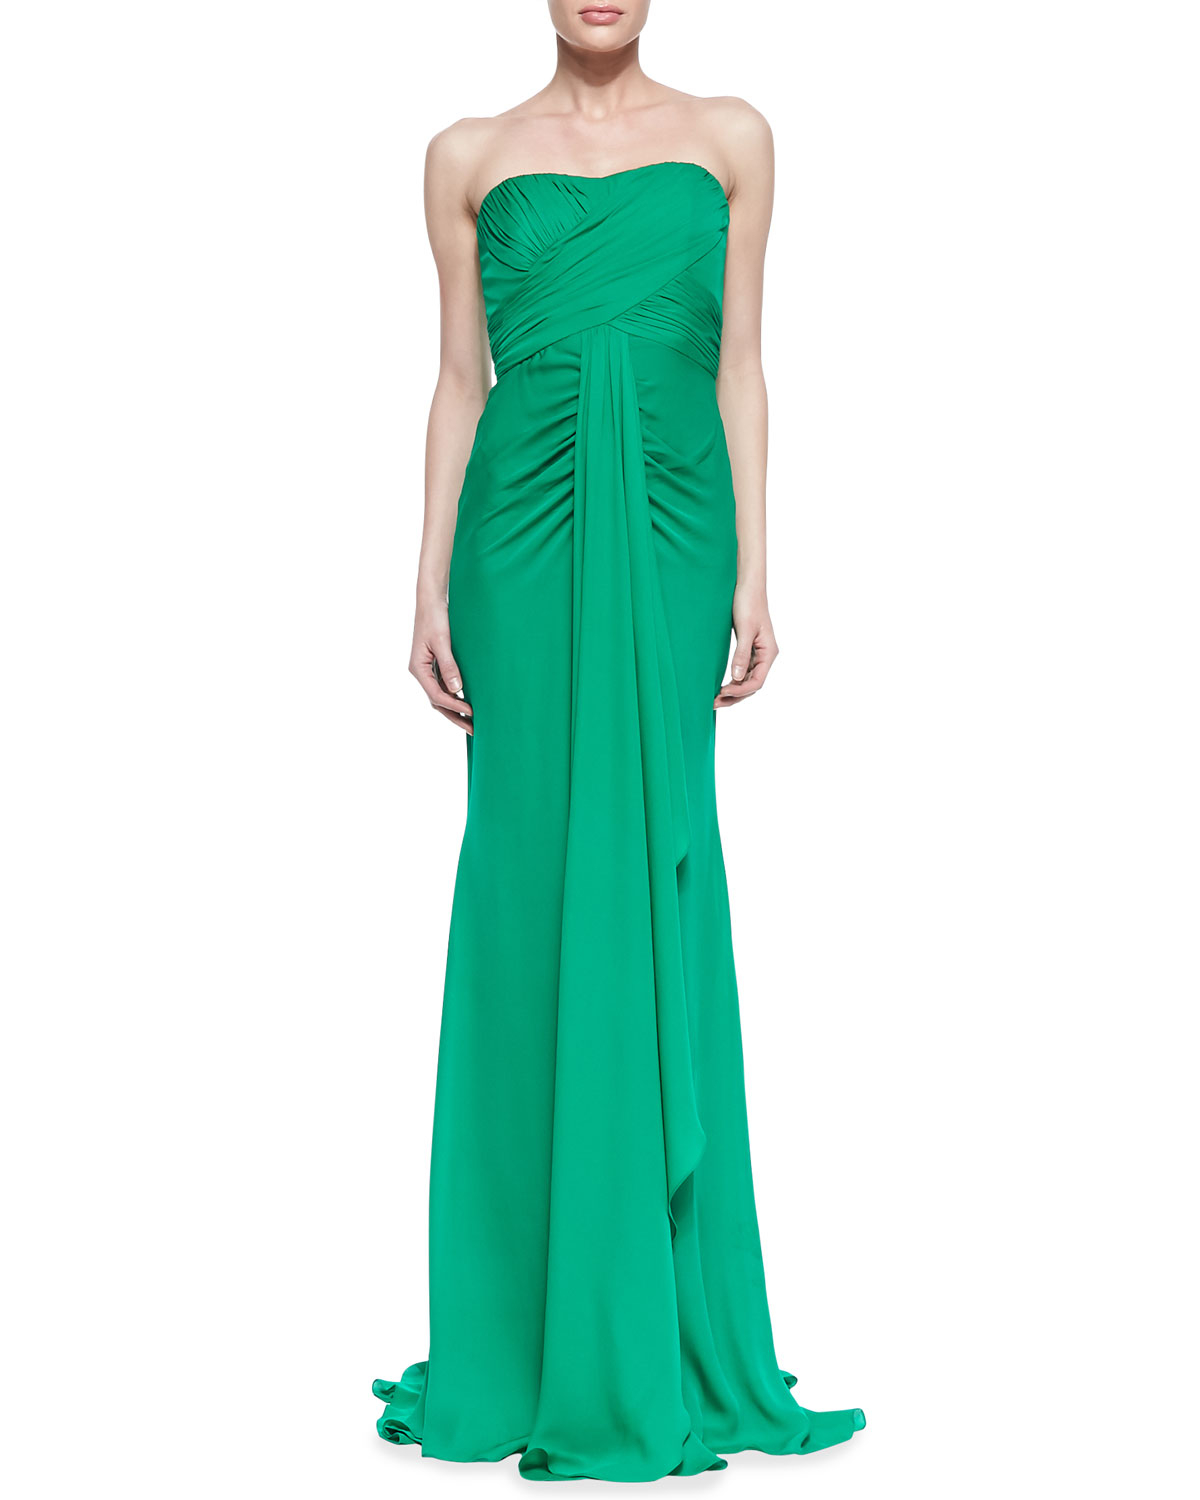 Lyst - Badgley Mischka Strapless Ruched-Bodice Draped Gown in Green